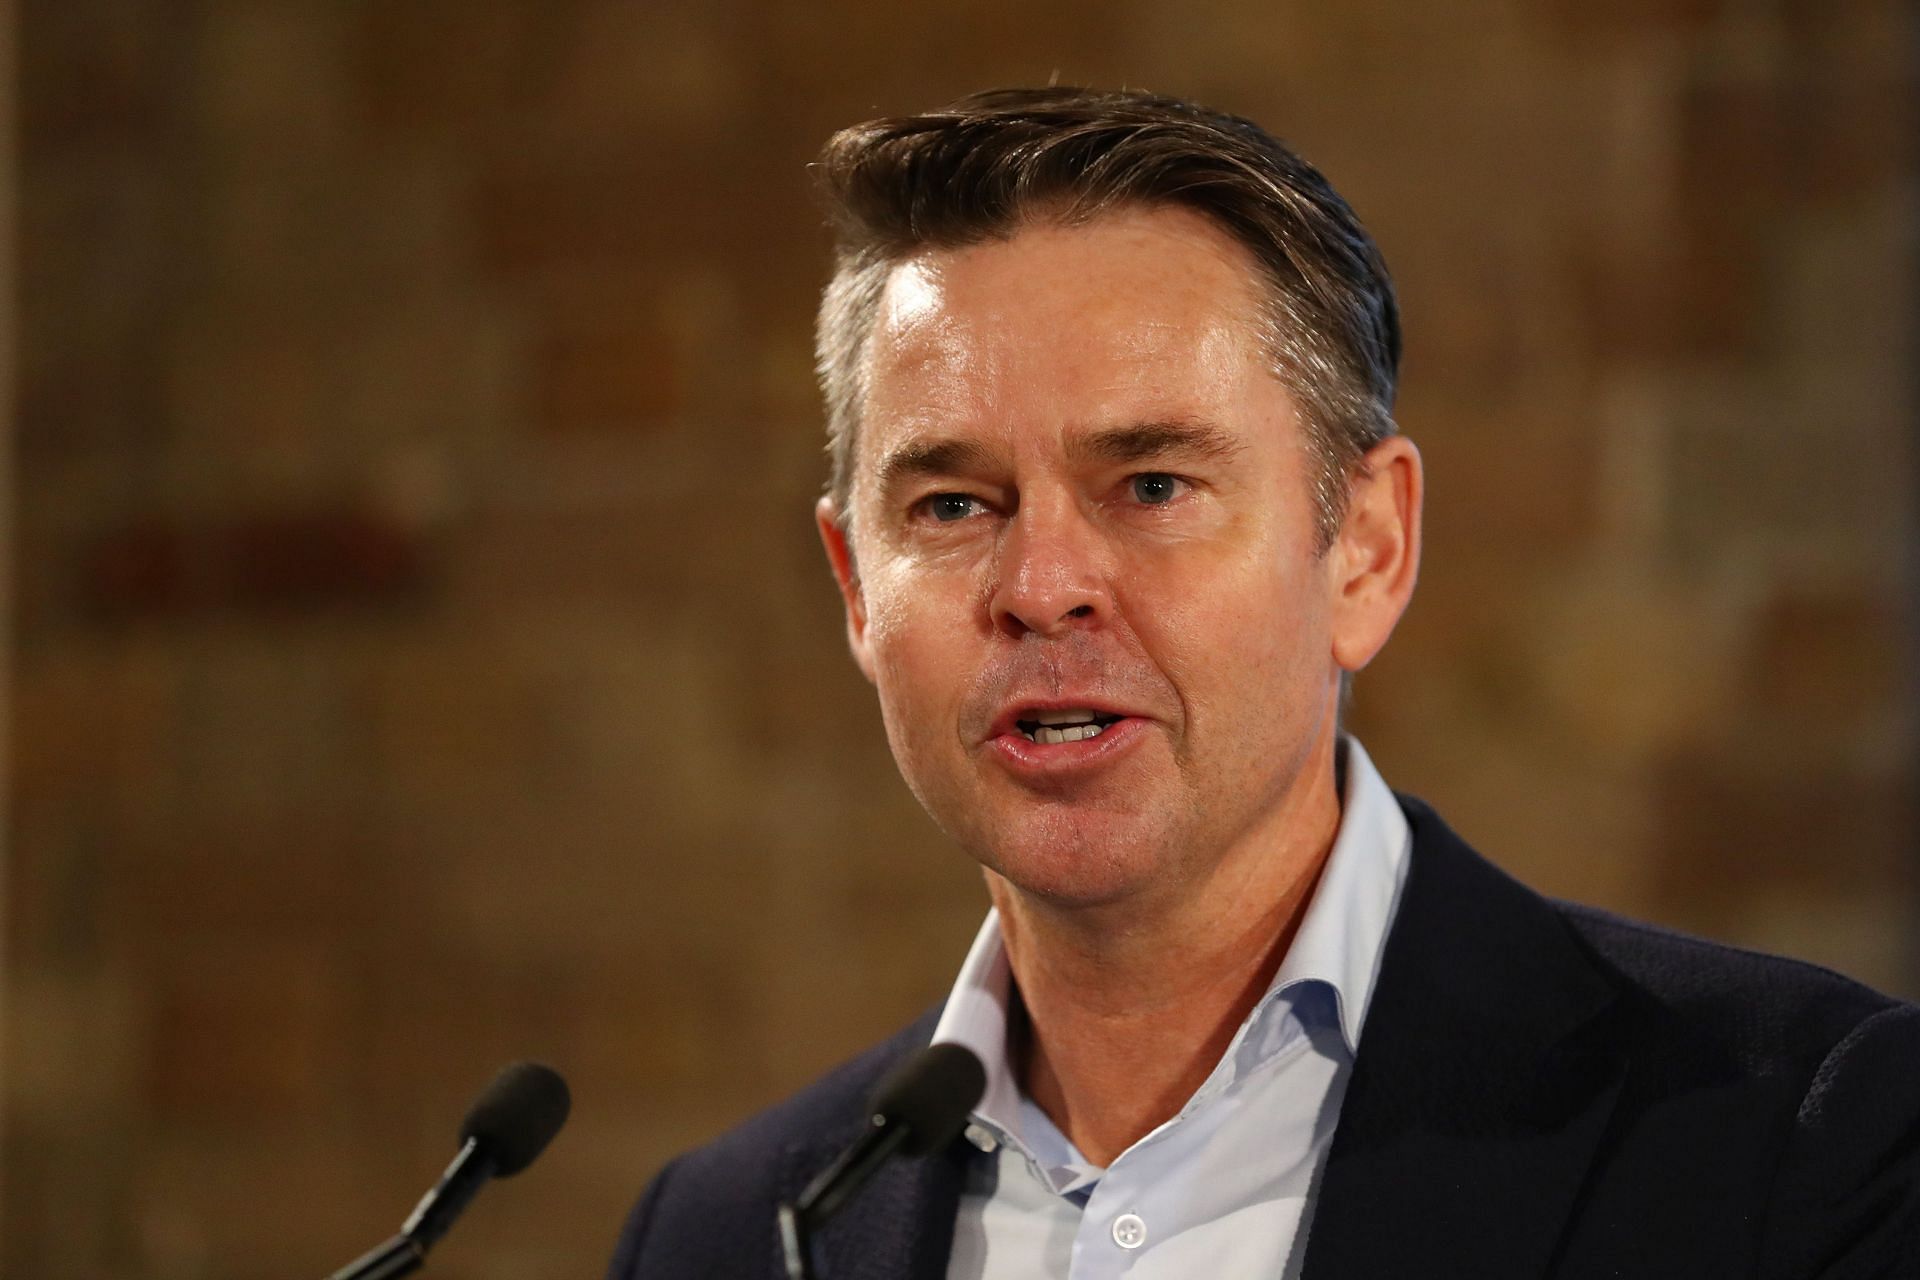 Todd Woodbridge at the 2022 Davis Cup qualifier previews